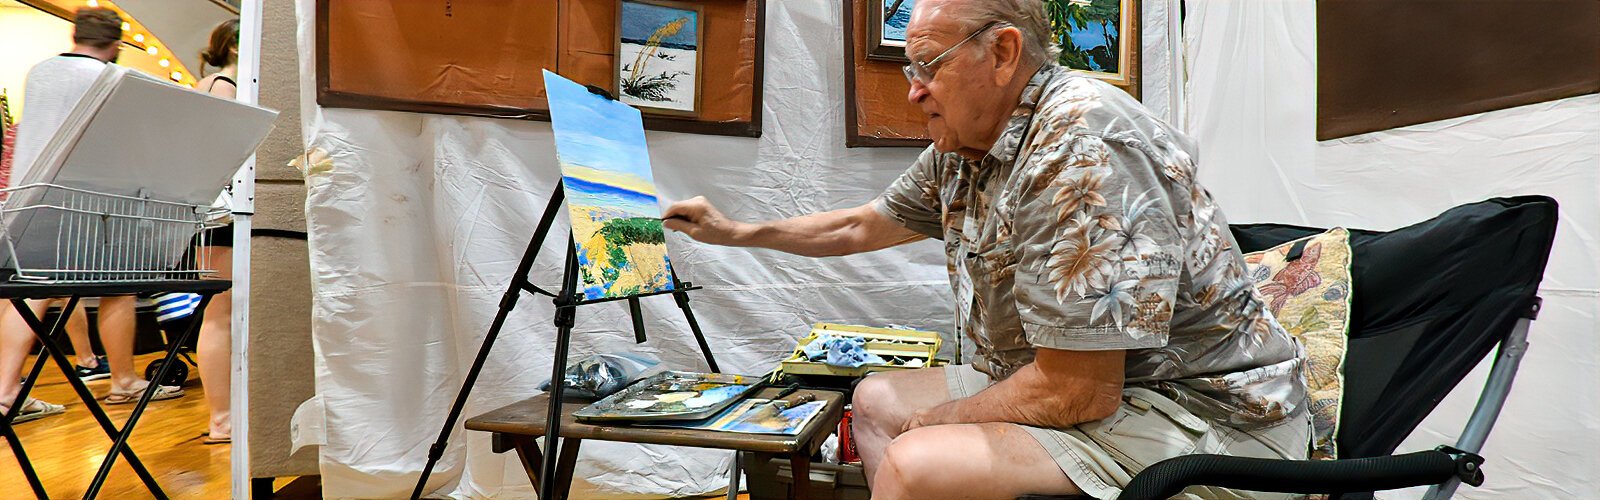 Using a palette knife, artist Randy Deering paints one of his favorite Floridian coastal scenes while participating in PAVA’s Cool Art Show in St Petersburg.